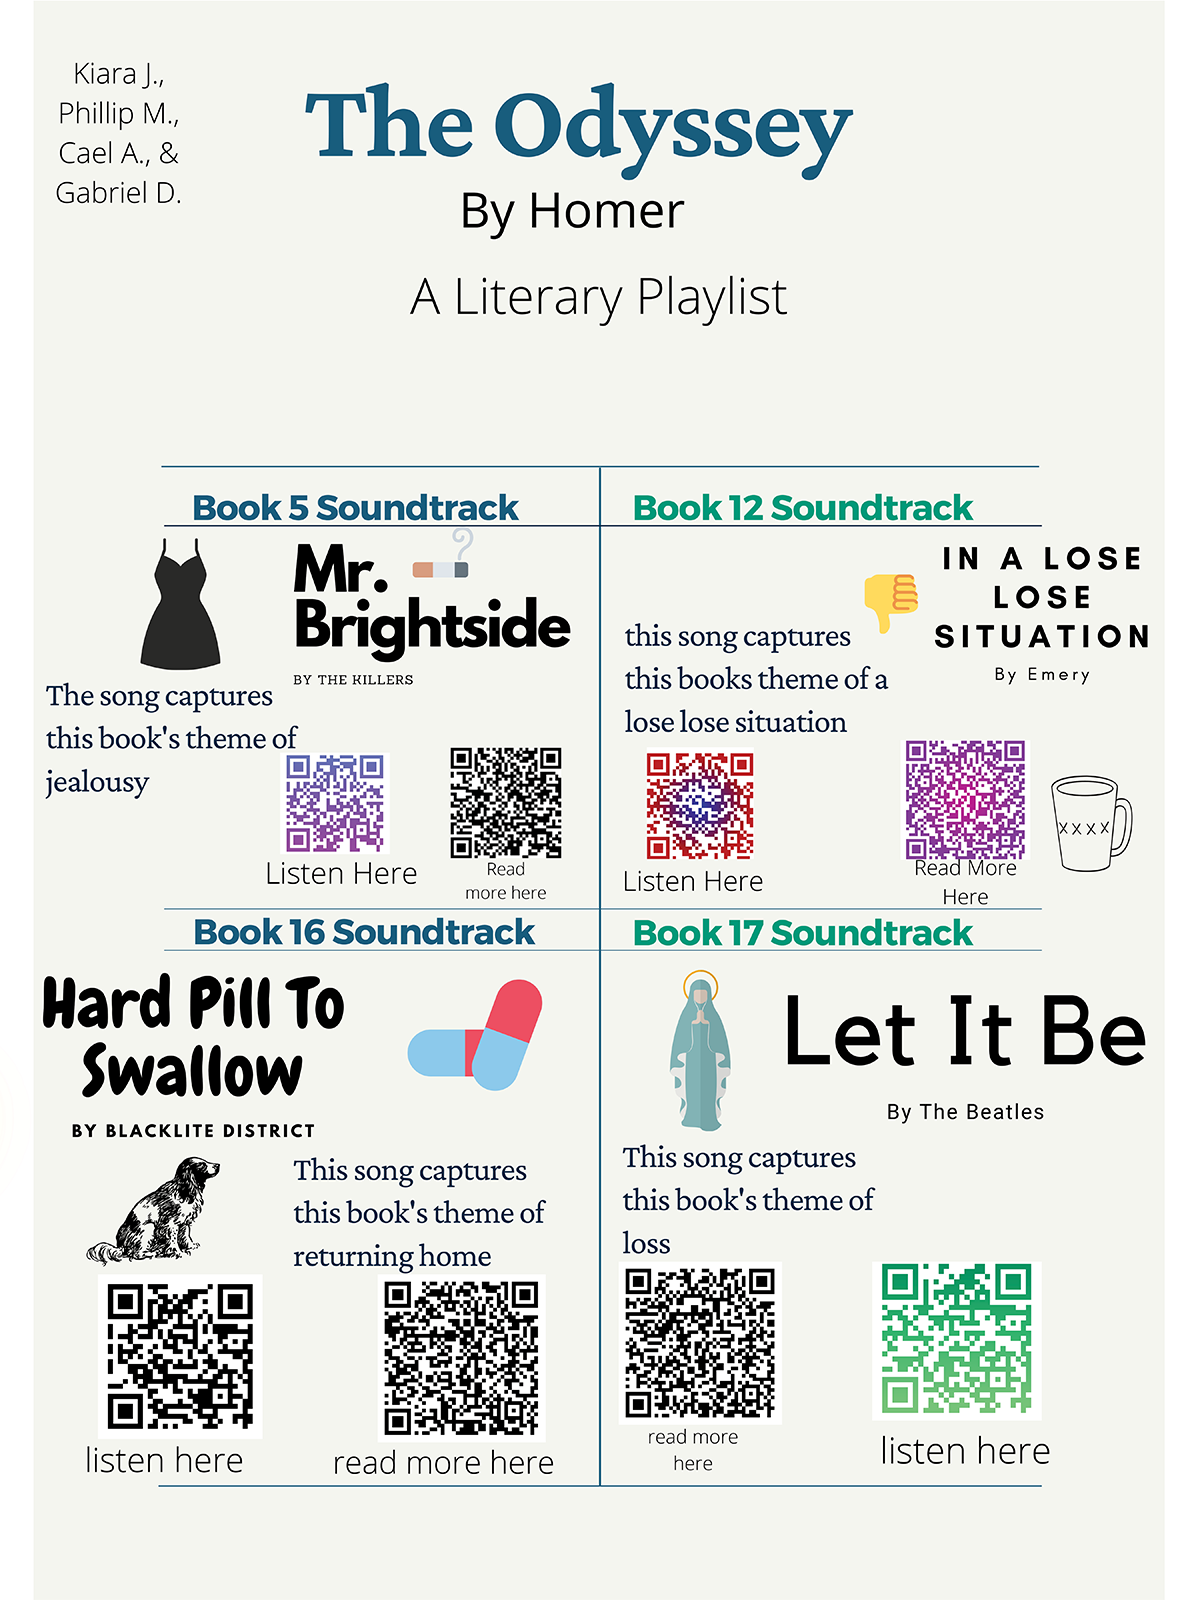 The Odyssey Infographic #6: Literary Playlist Project